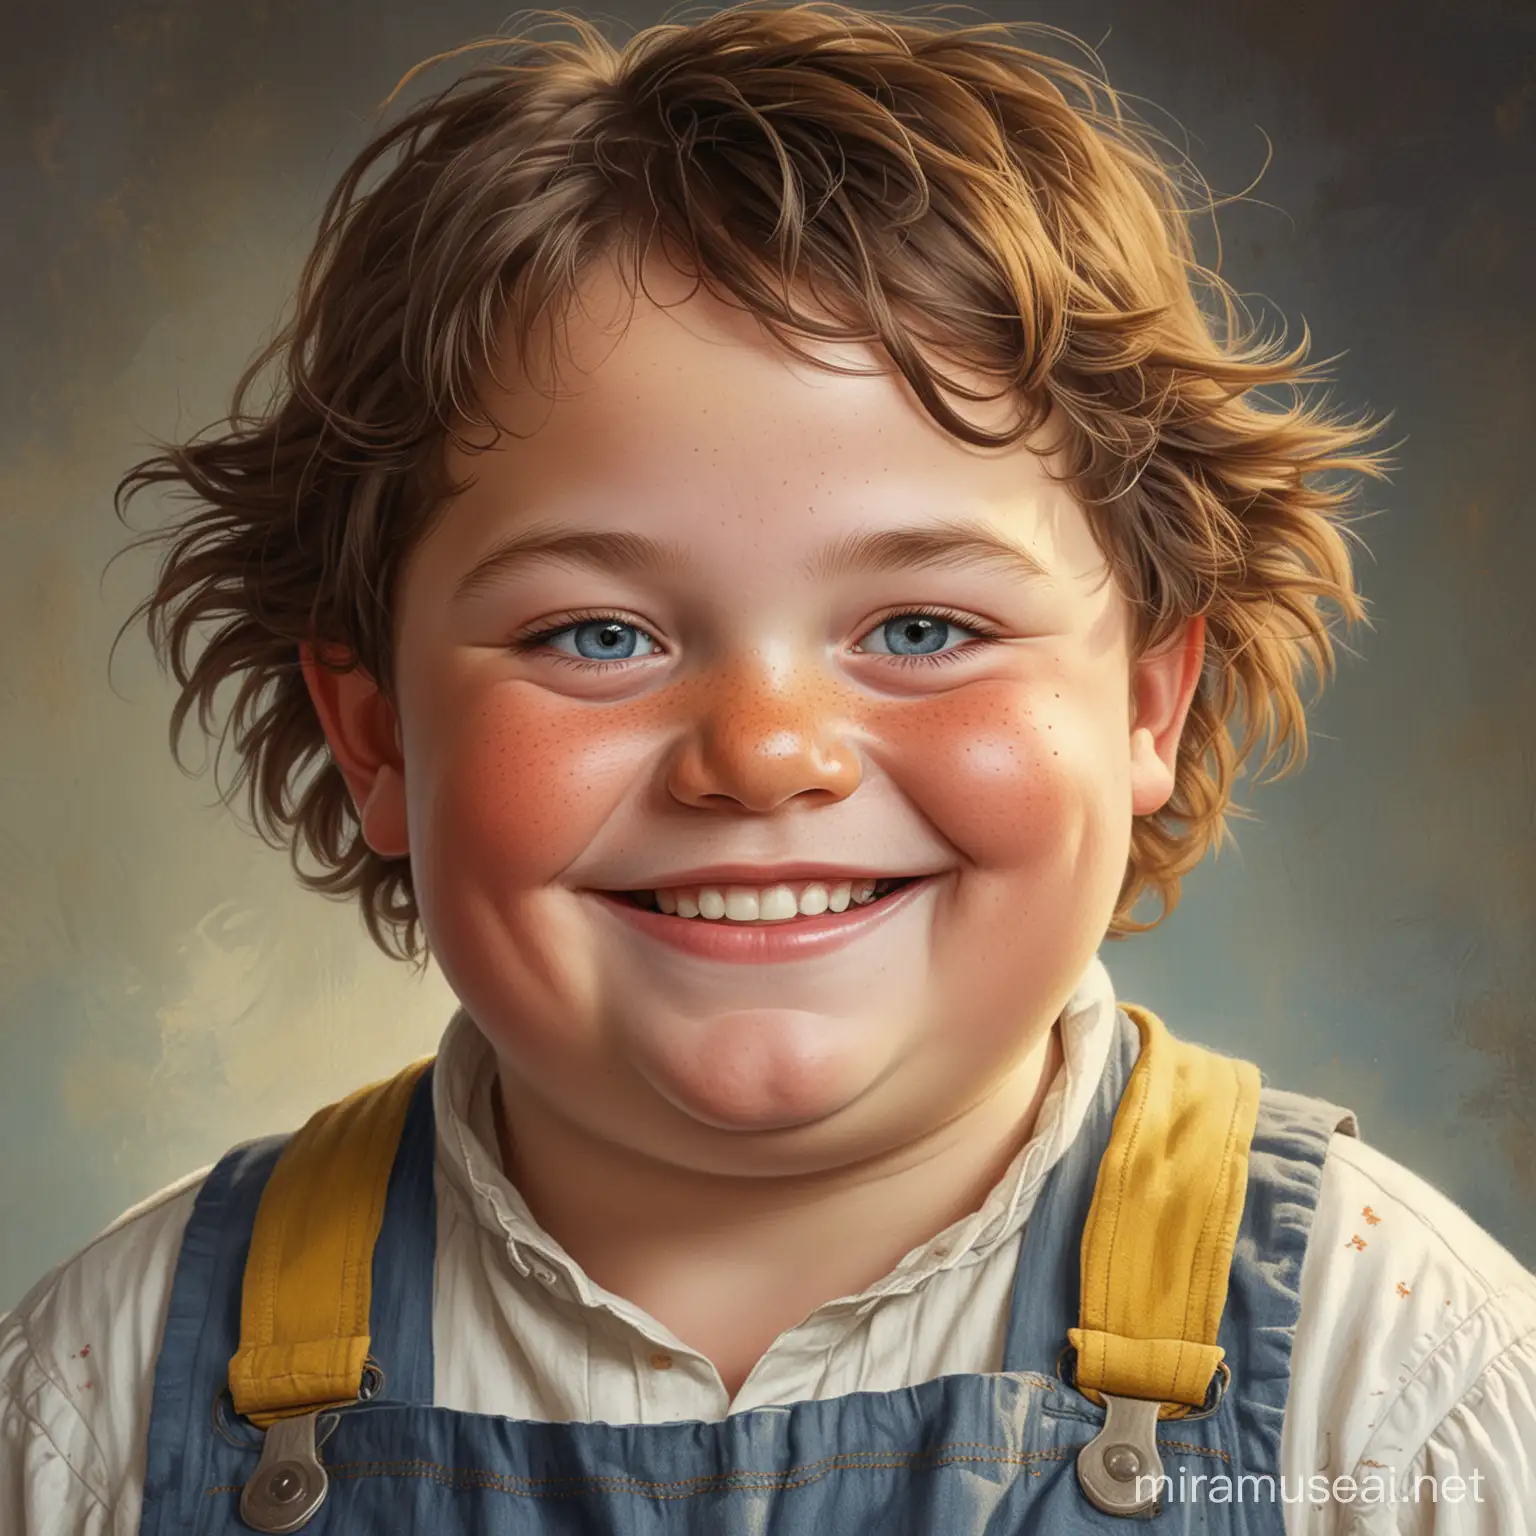 Cheerful SevenYearOld Peasant Boy with Chubby Face and Freckles